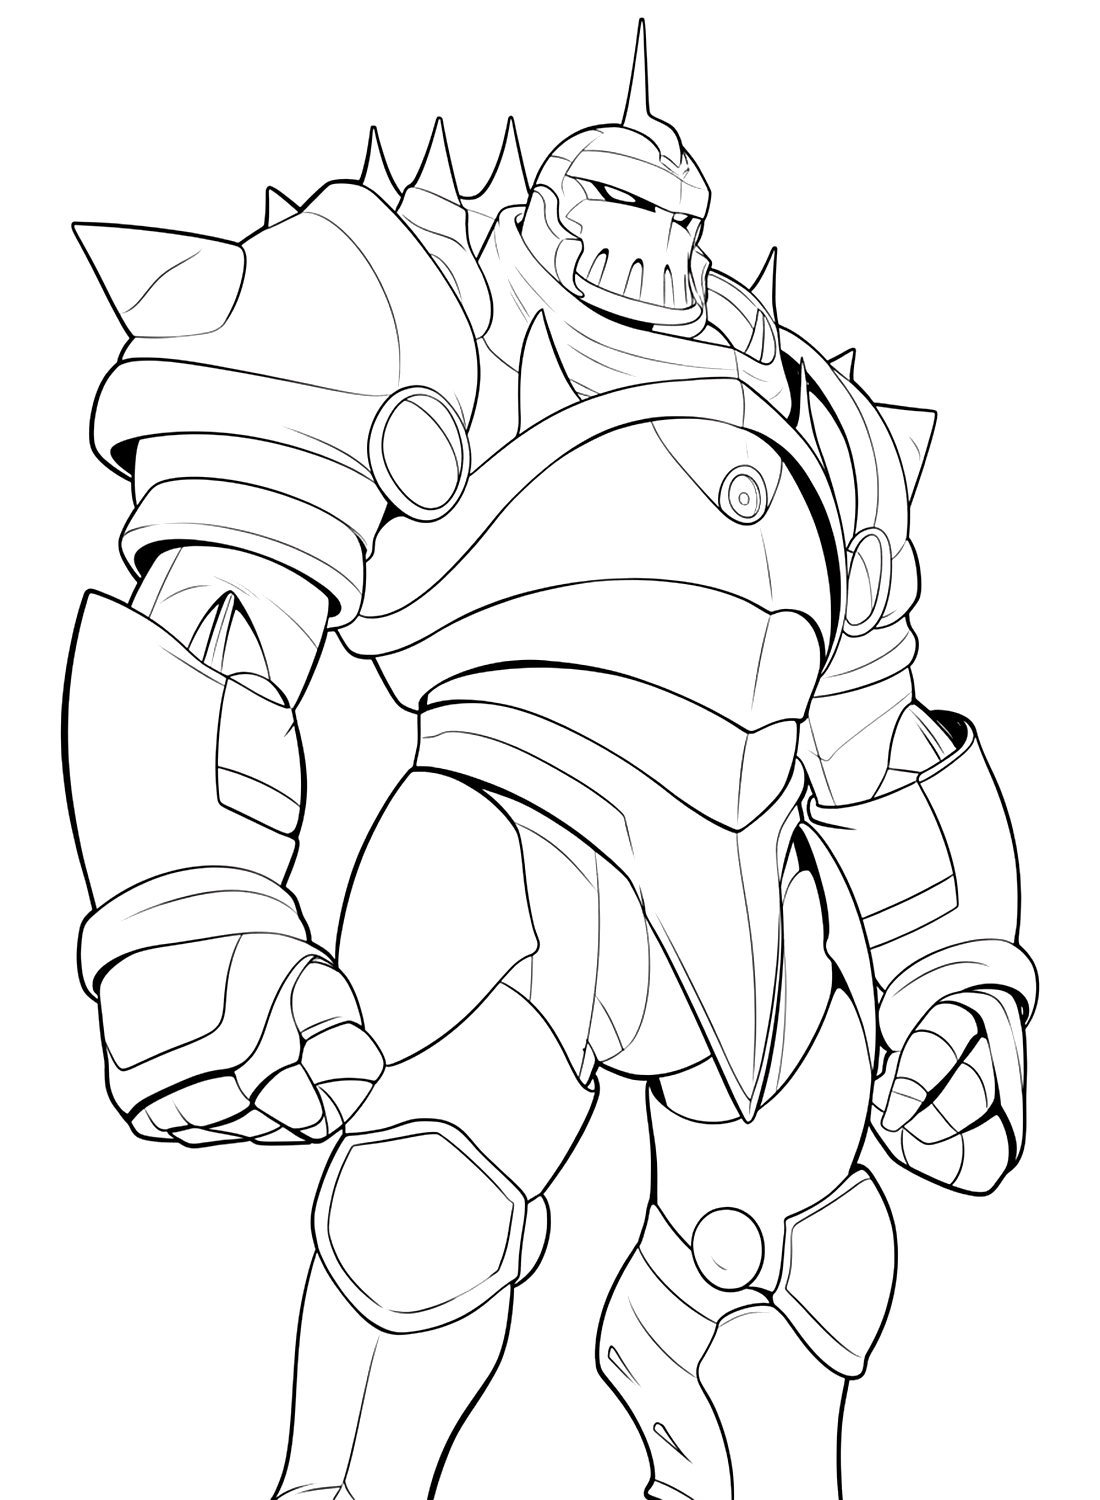 Alphonse Elric Coloring Page to Download from Alphonse Elric